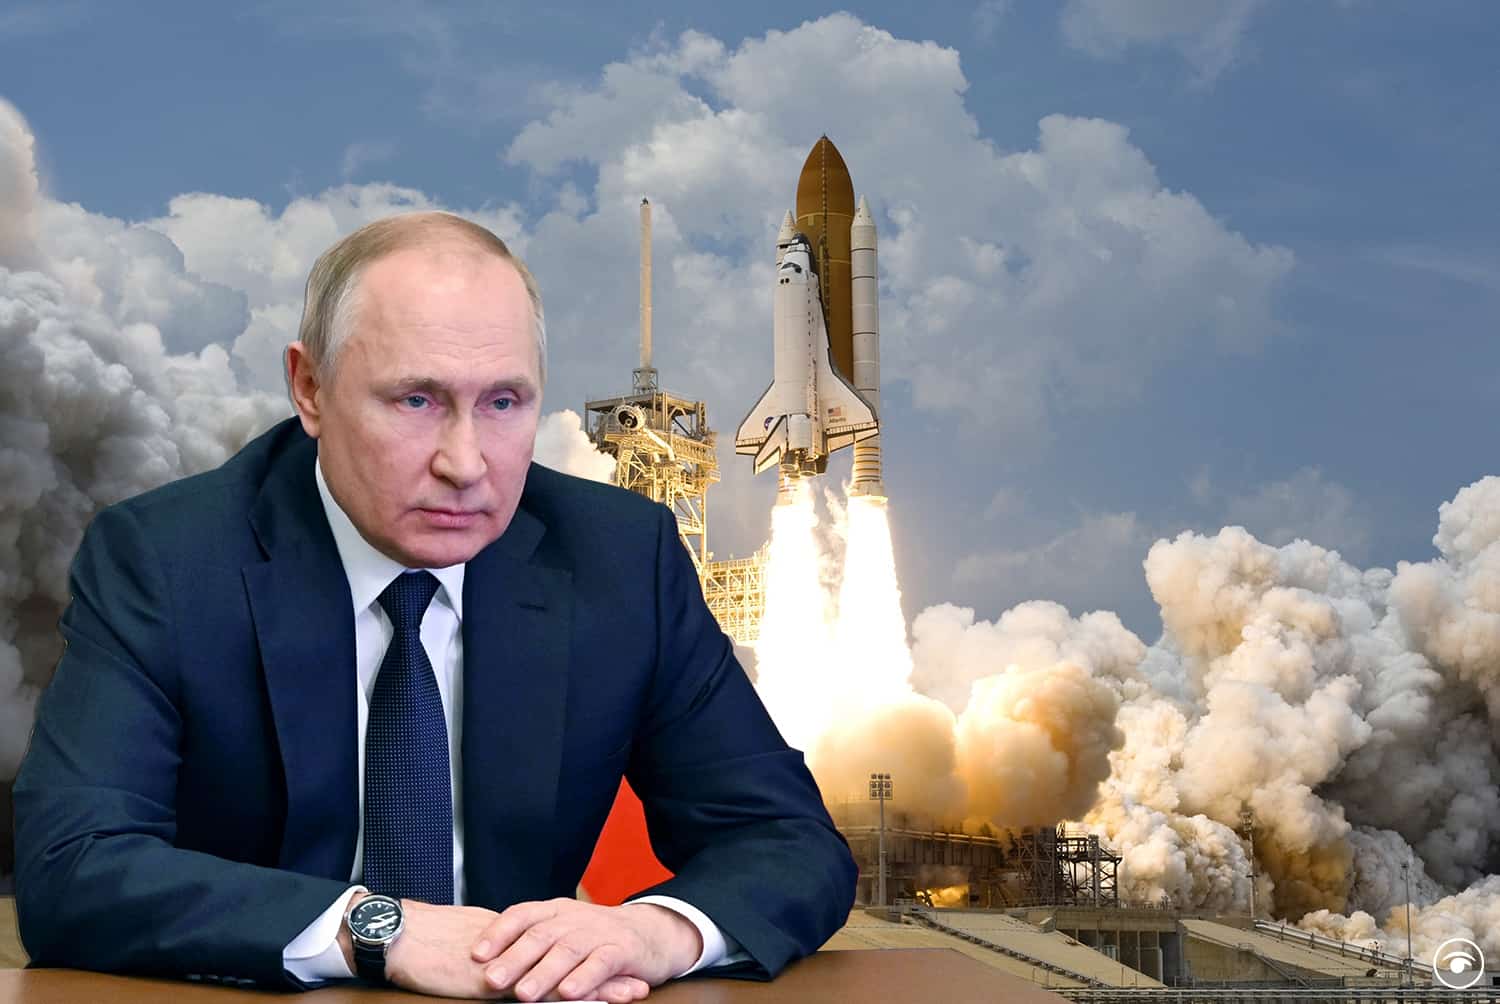 Fundraiser set up to send Putin to Jupiter – and it’s already hit a skyrocketed amount